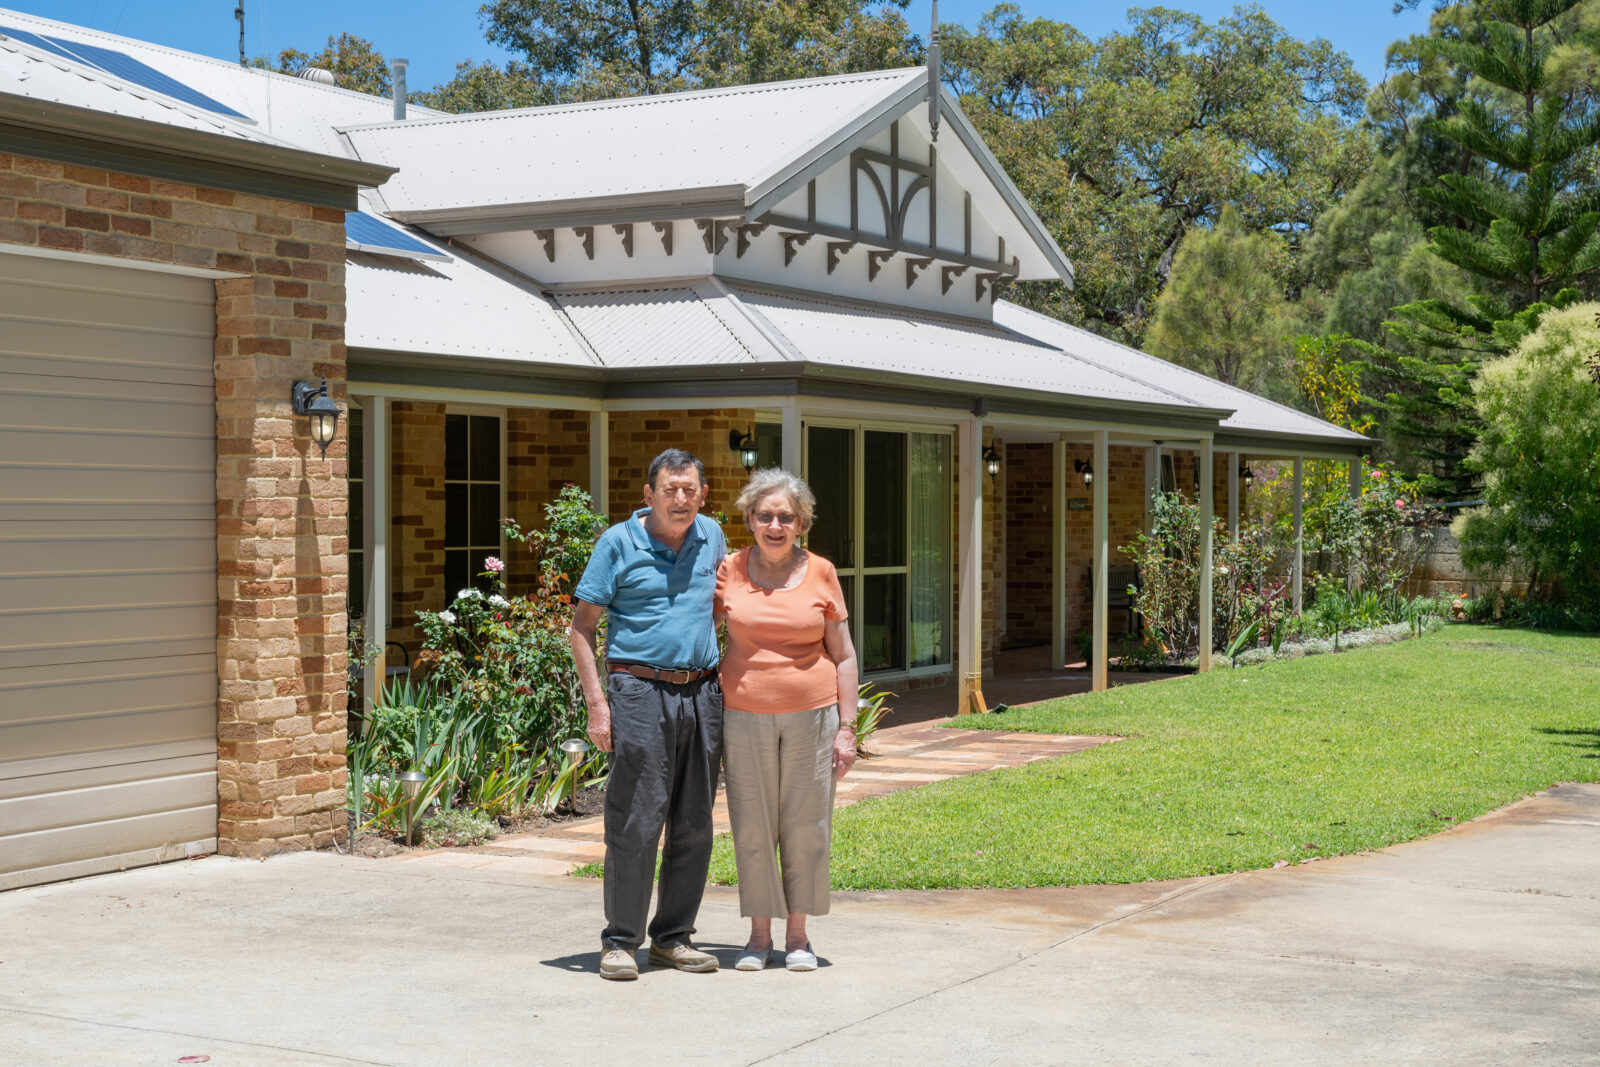 Street view photo of loyal Plunkett Home clients Eric and Leonie standing outside of their new federation-style home.